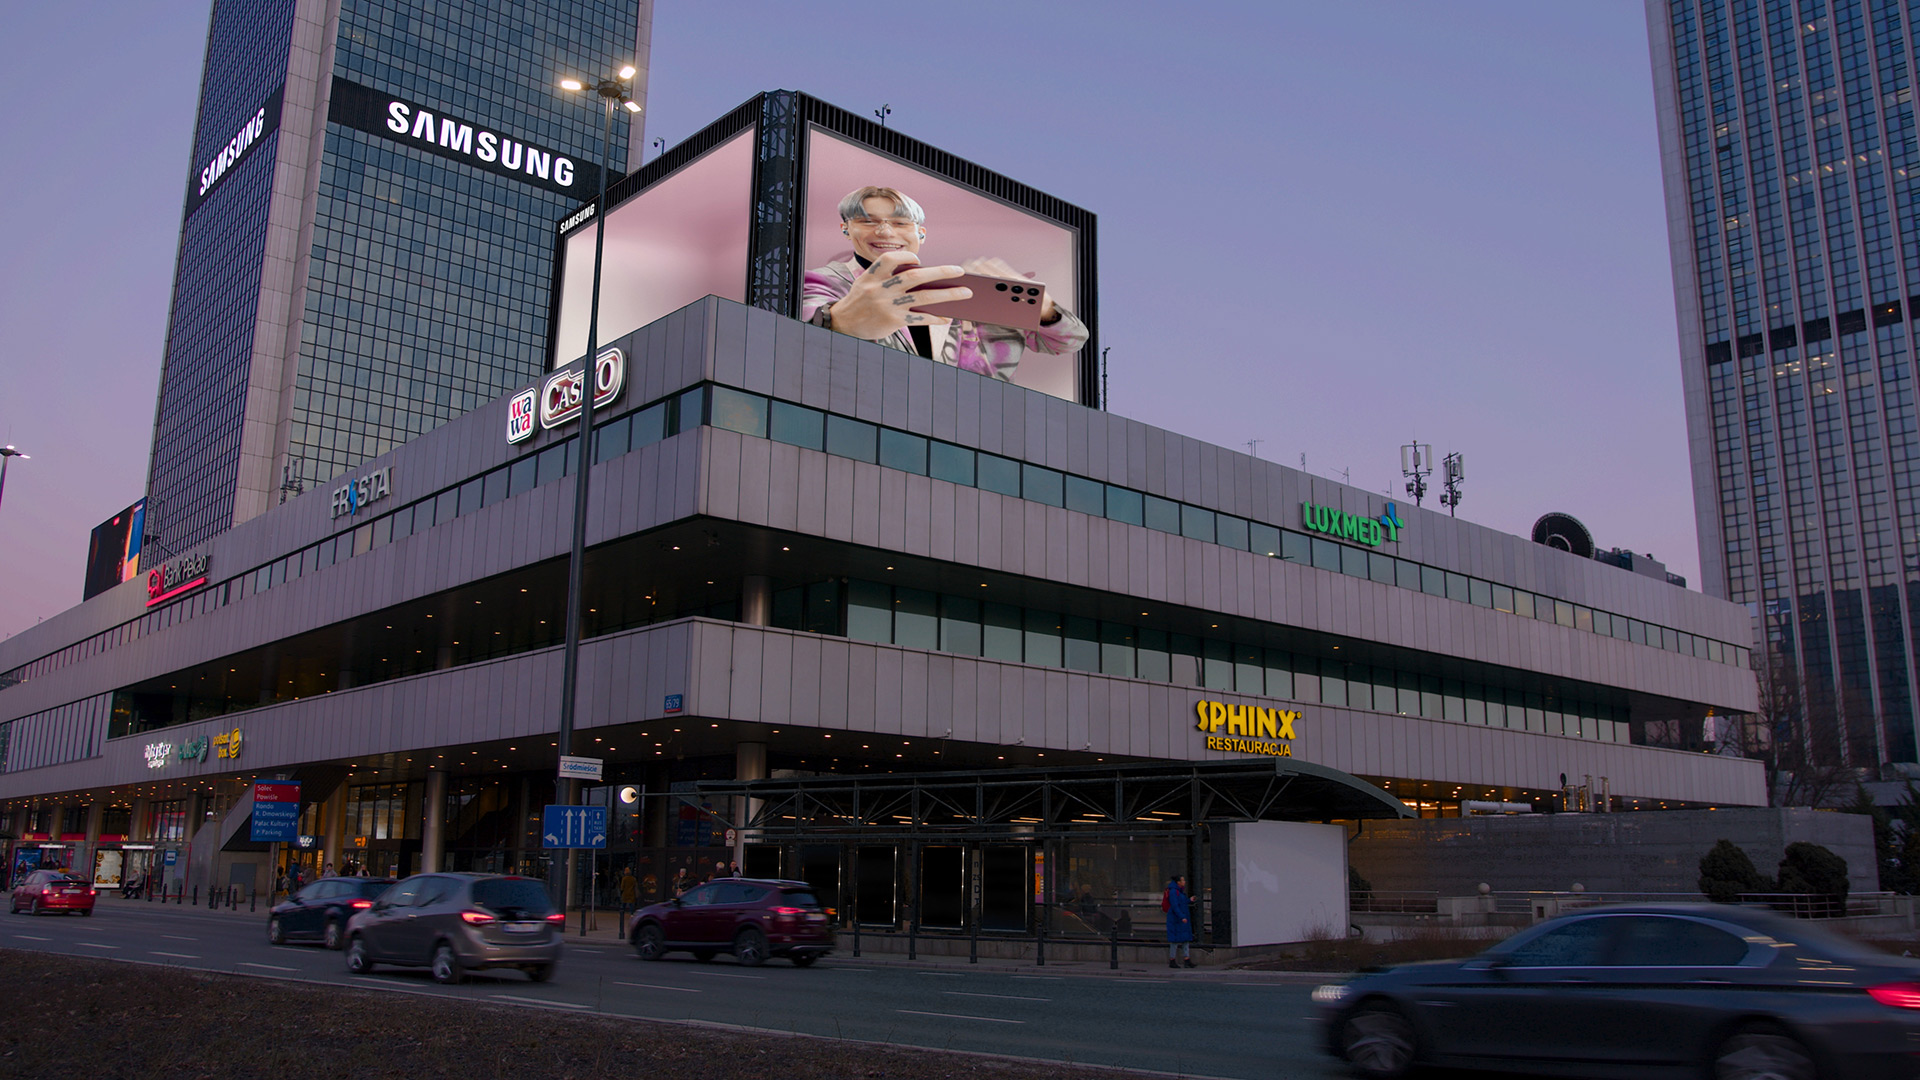 Samsung launches Poland’s first 3D DOOH campaign revealing Gen Z’s idol